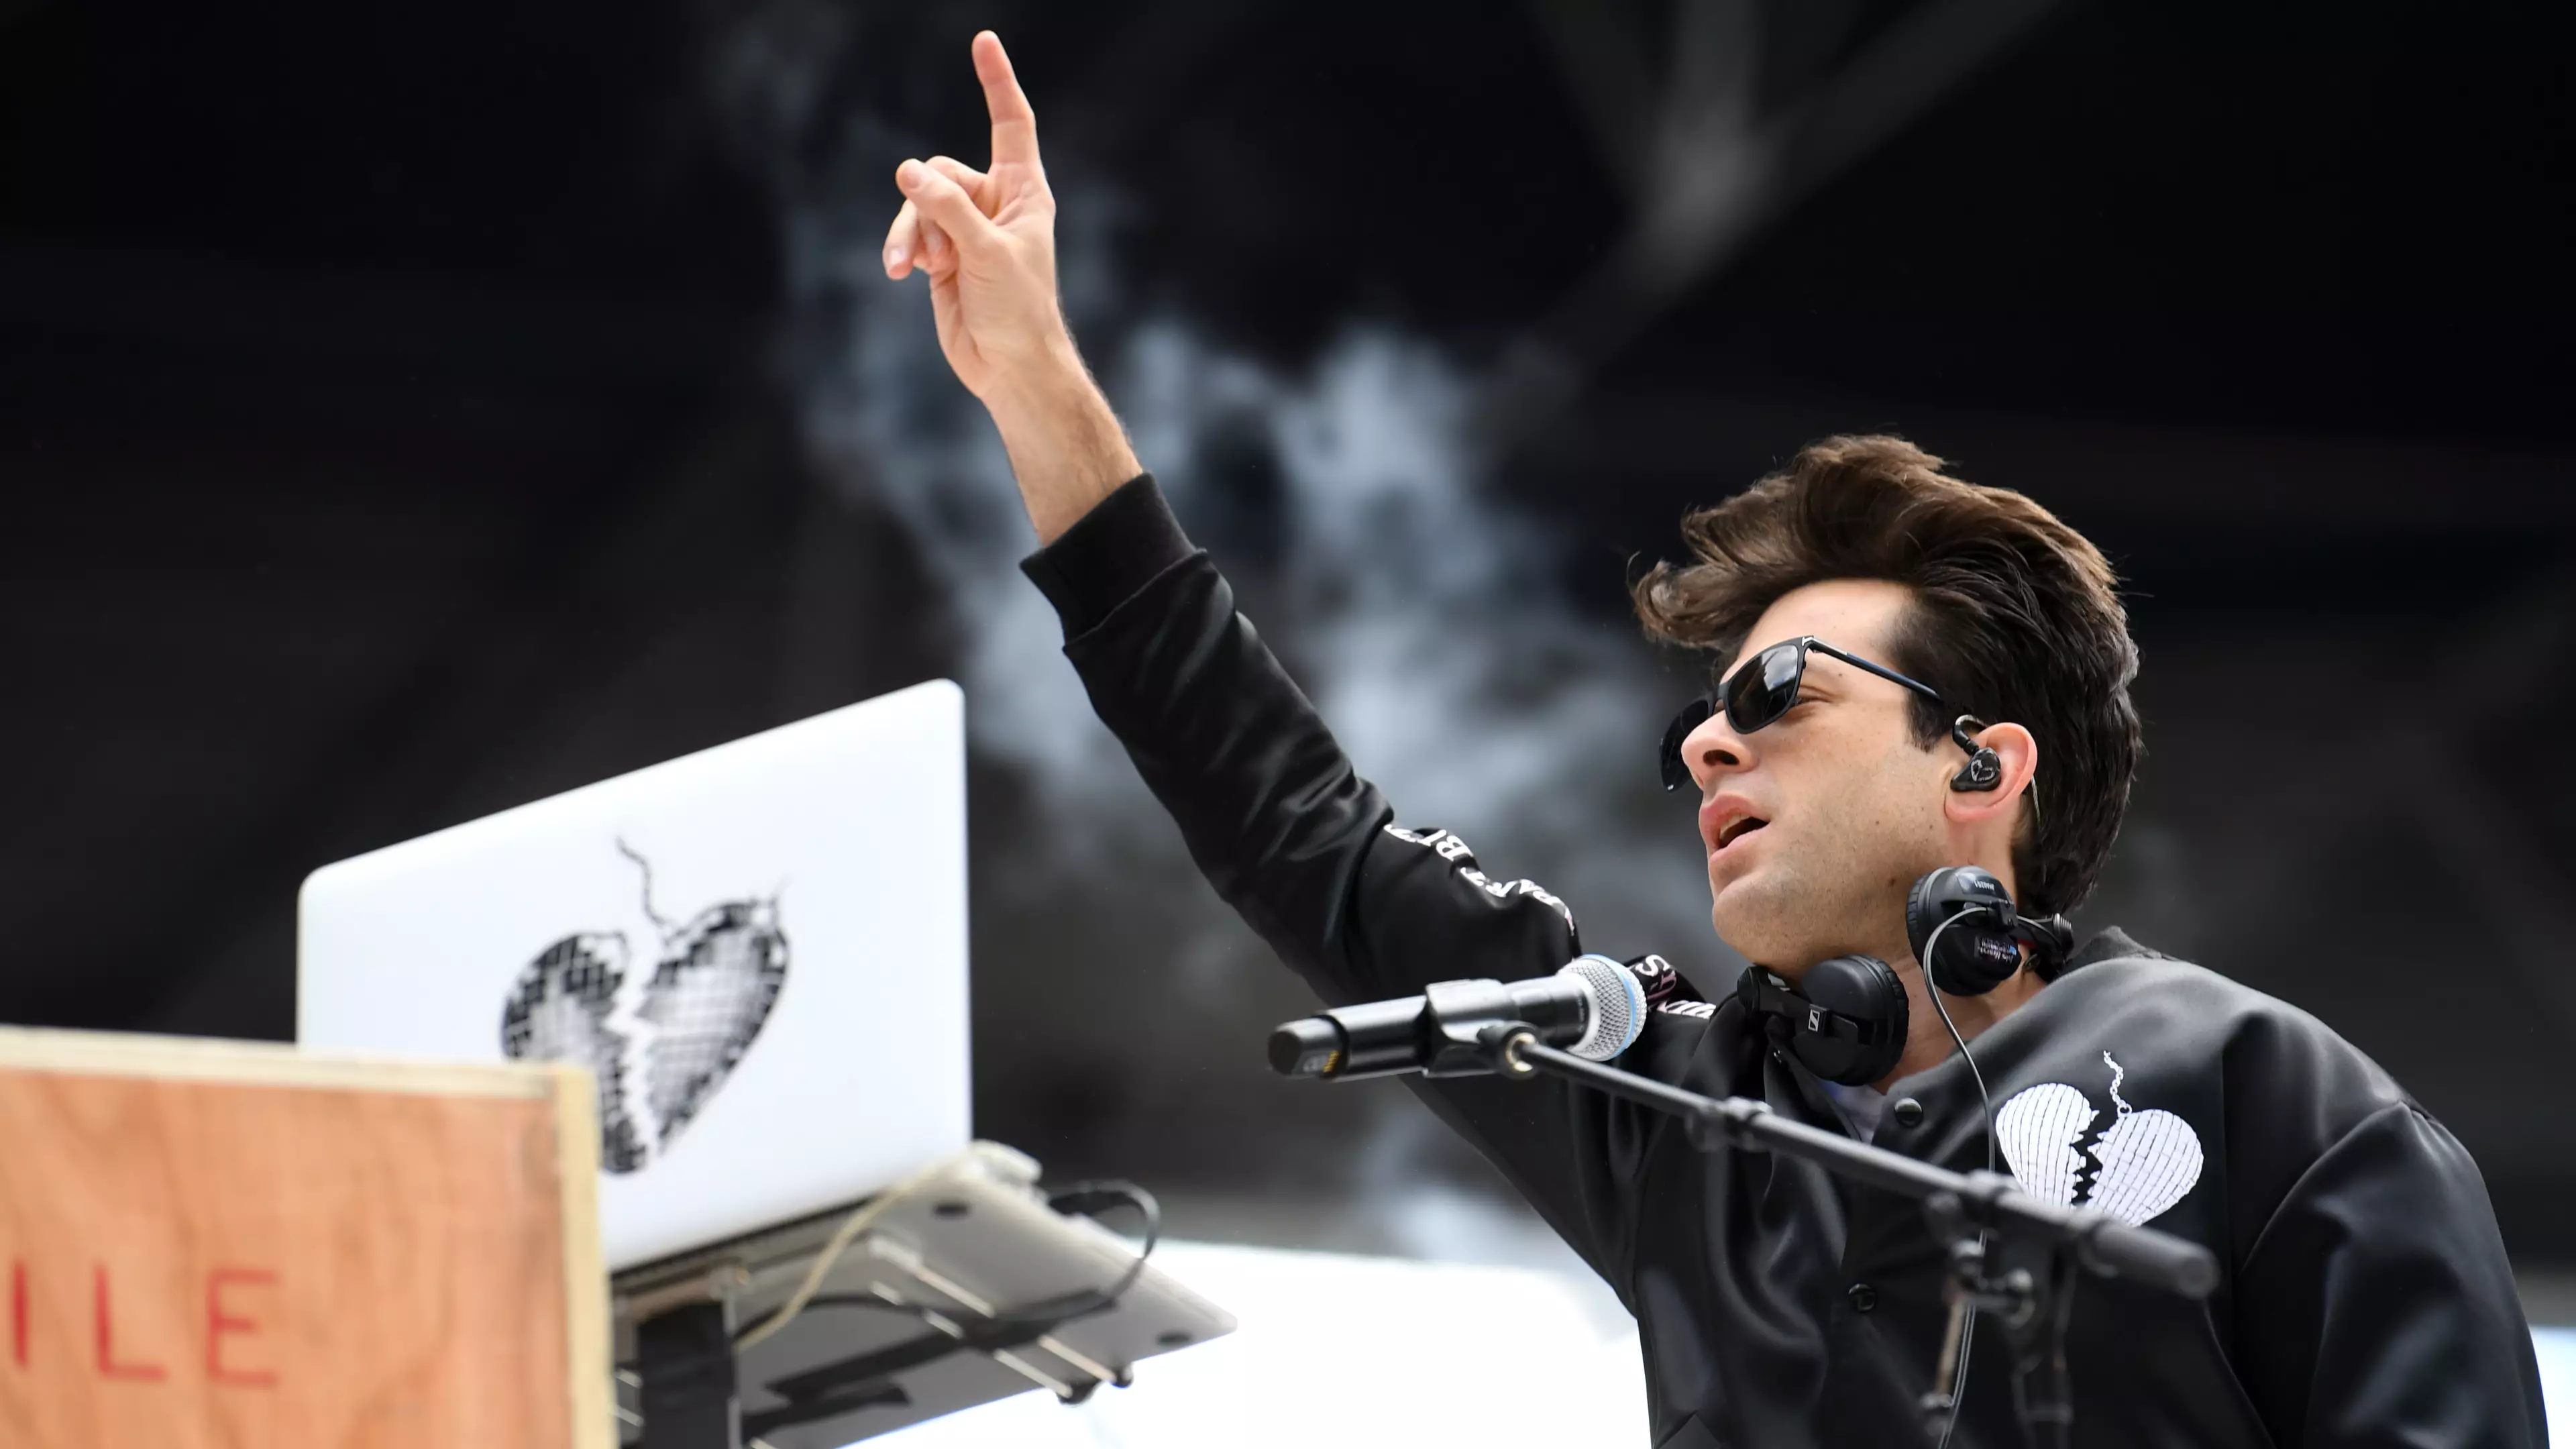 What Is A Sapiosexual? Mark Ronson Comes Out But What Does It Mean?